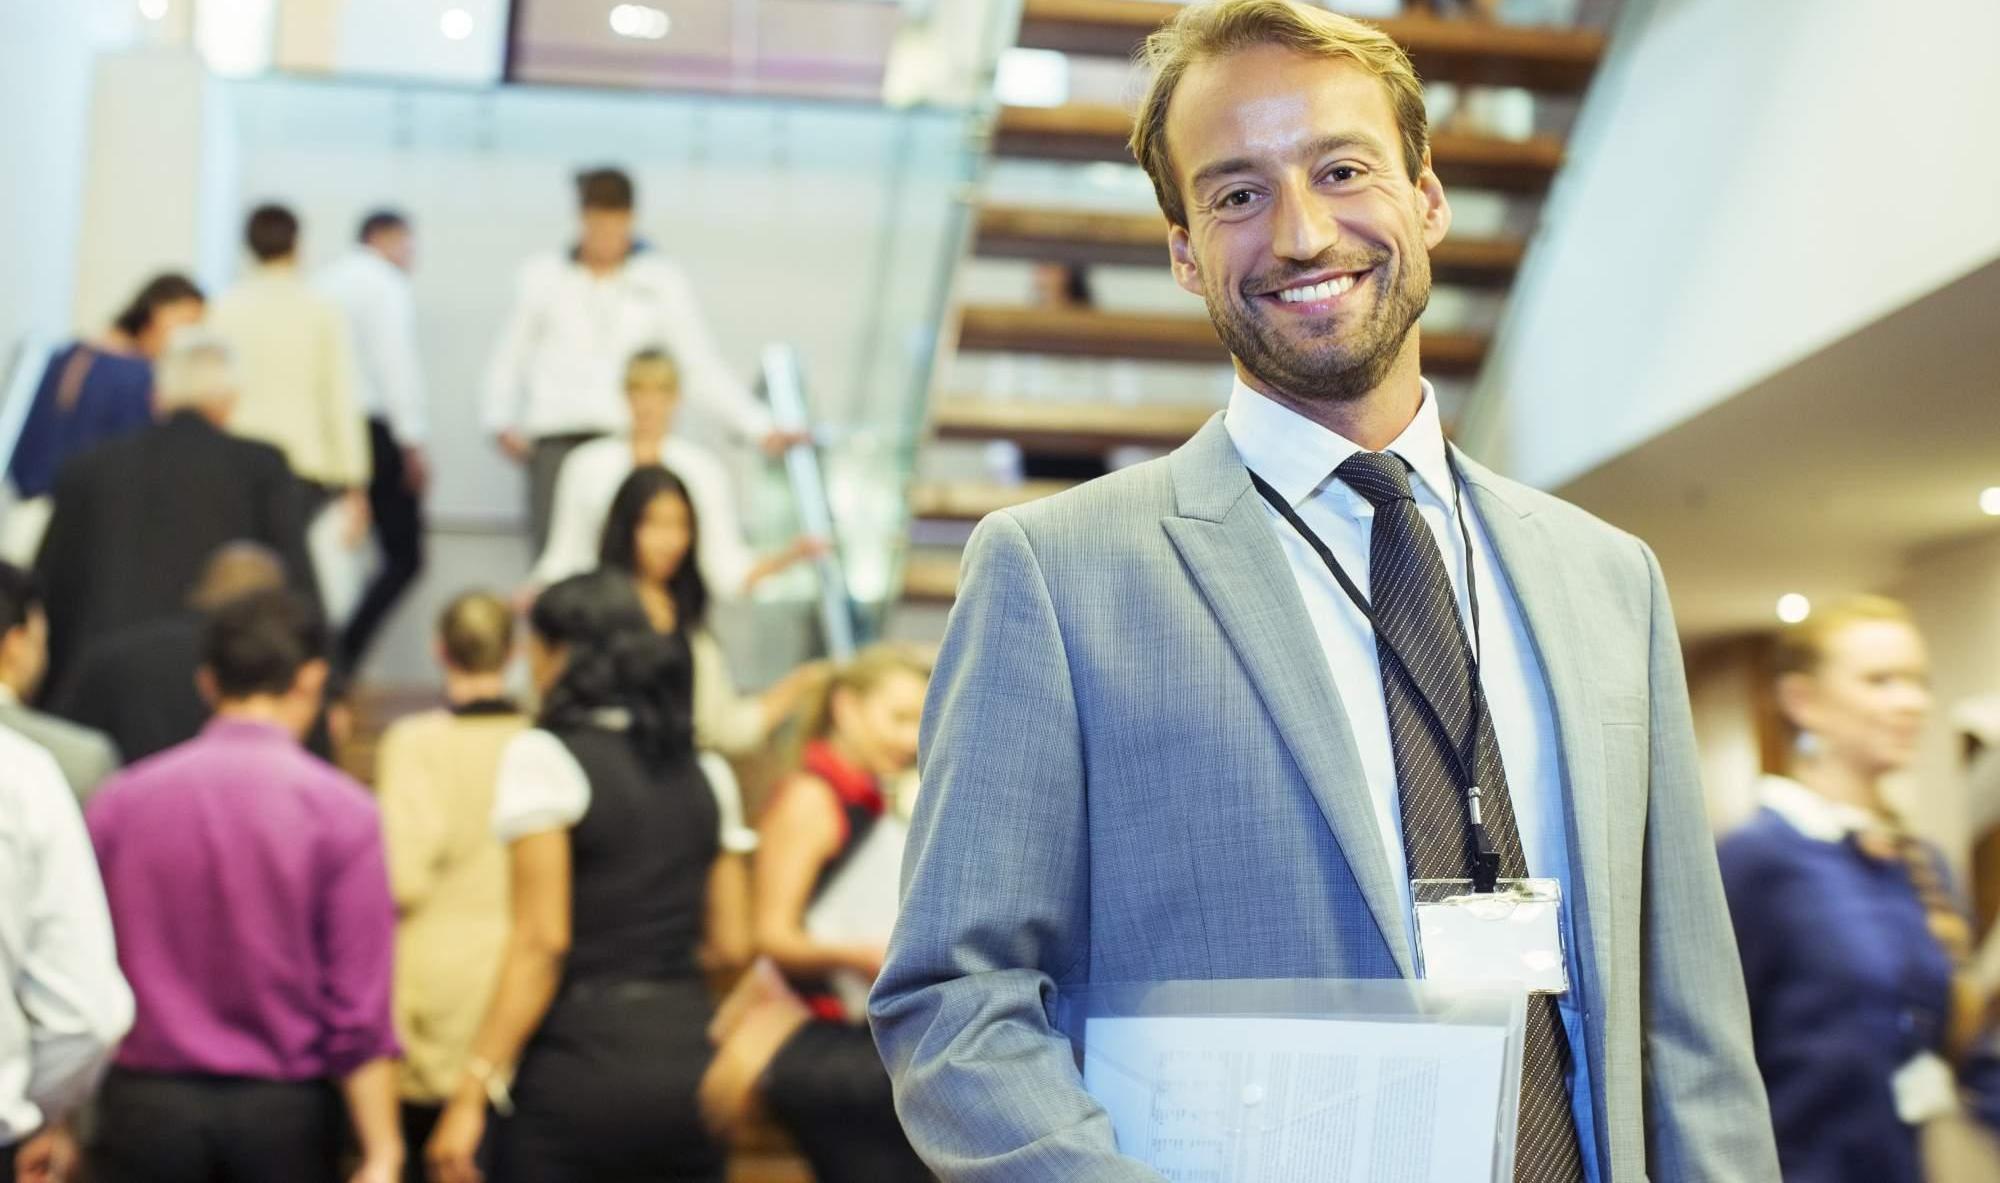 Portrait of smiling businessman standing in crowded lobby of conference center